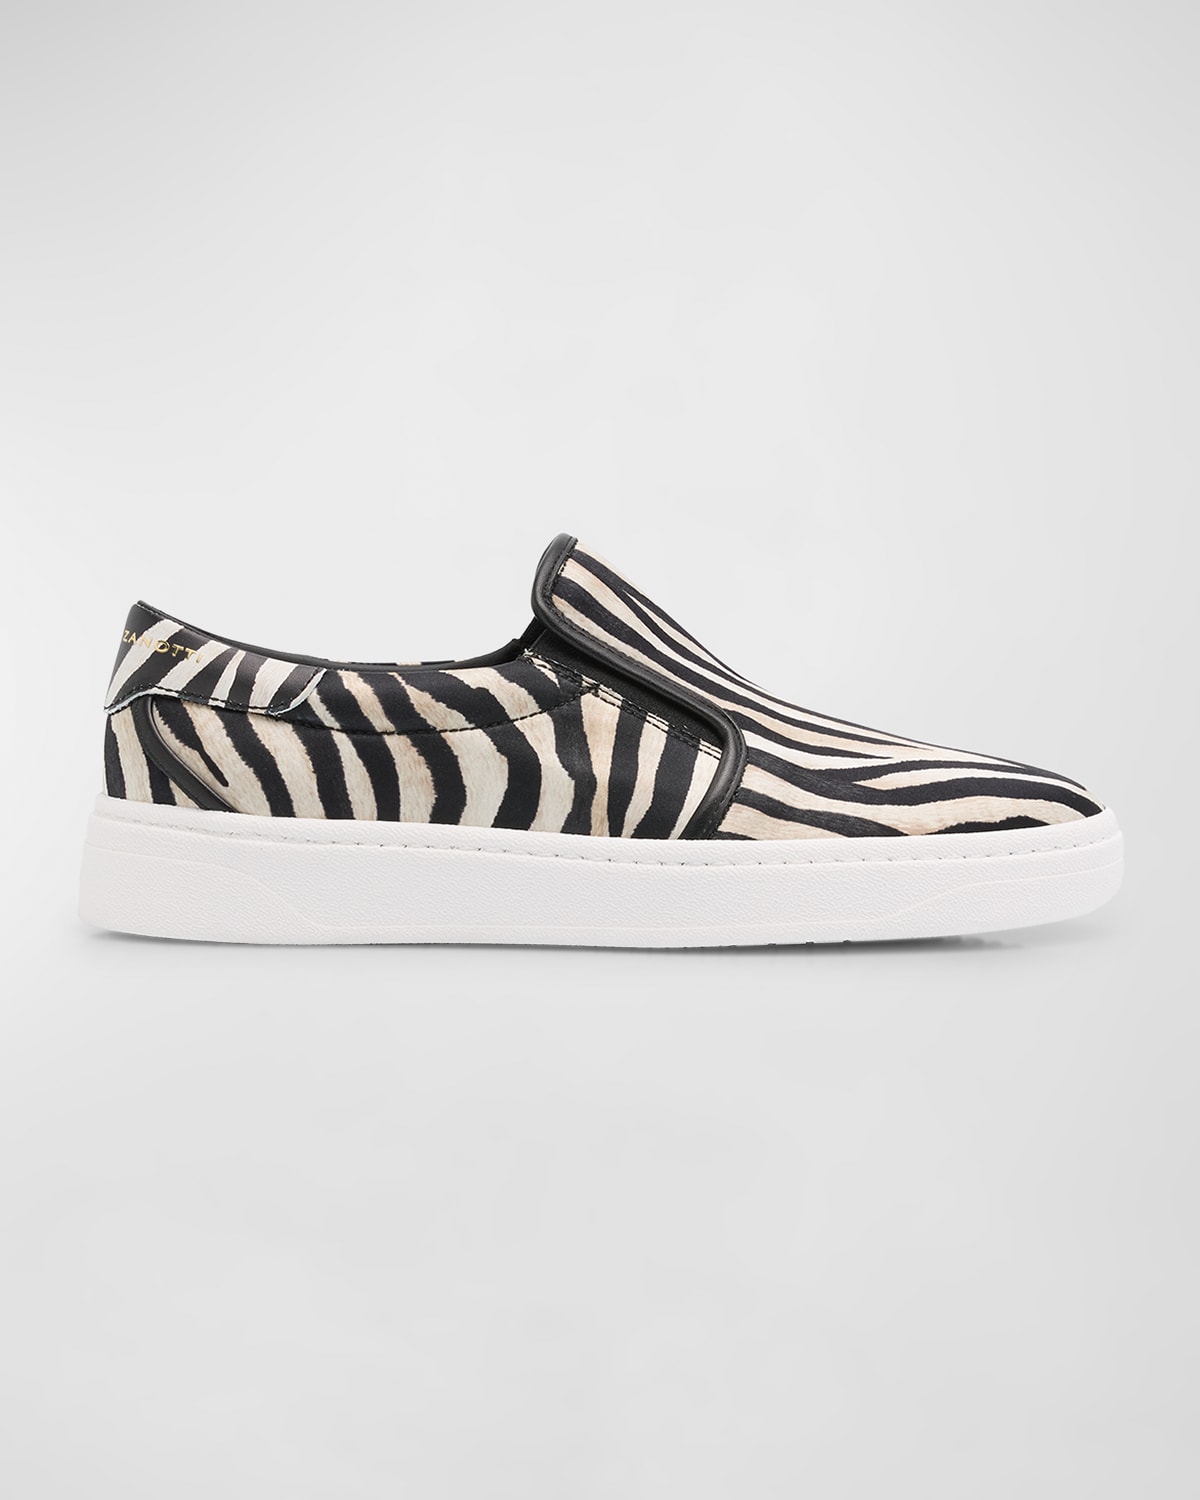 Men's Gz94 Printed Silk and Leather Slip-On Sneakers